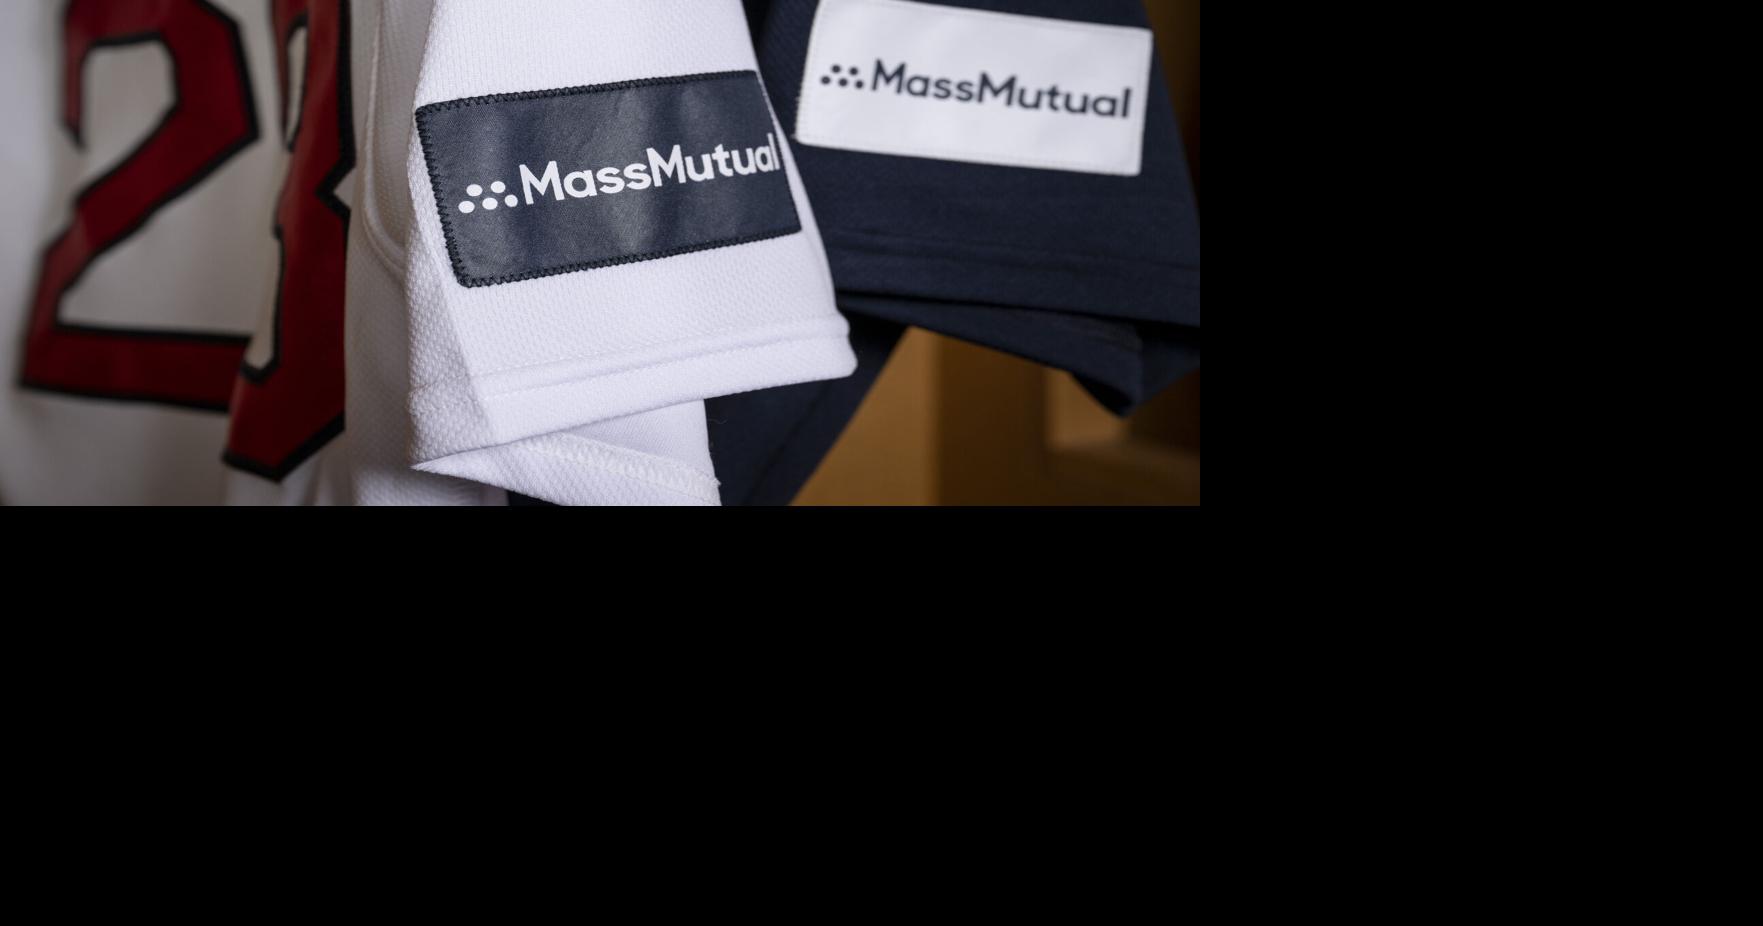 MassMutual lands deal for patch on Red Sox uniforms; Springfield